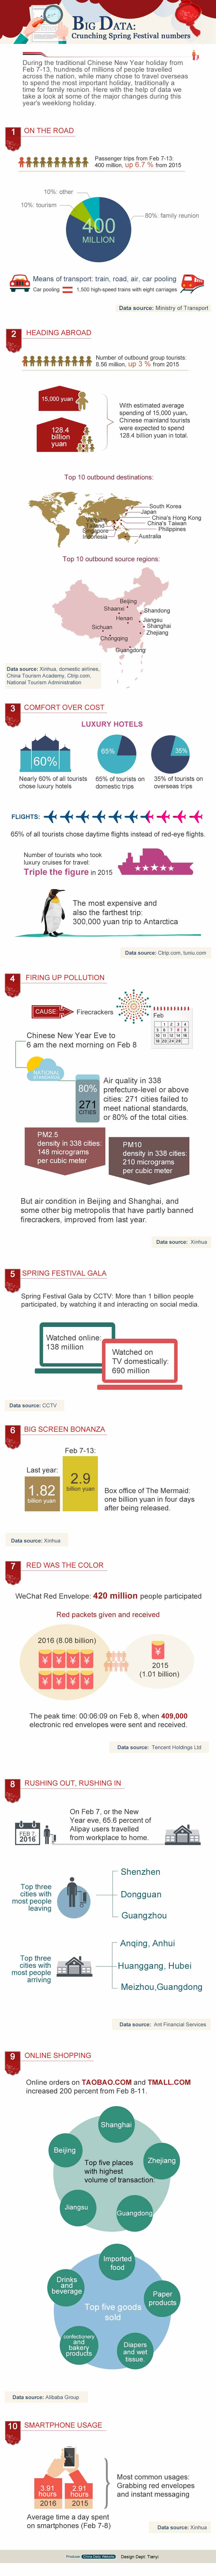 Big data: Crunching Spring Festival numbers